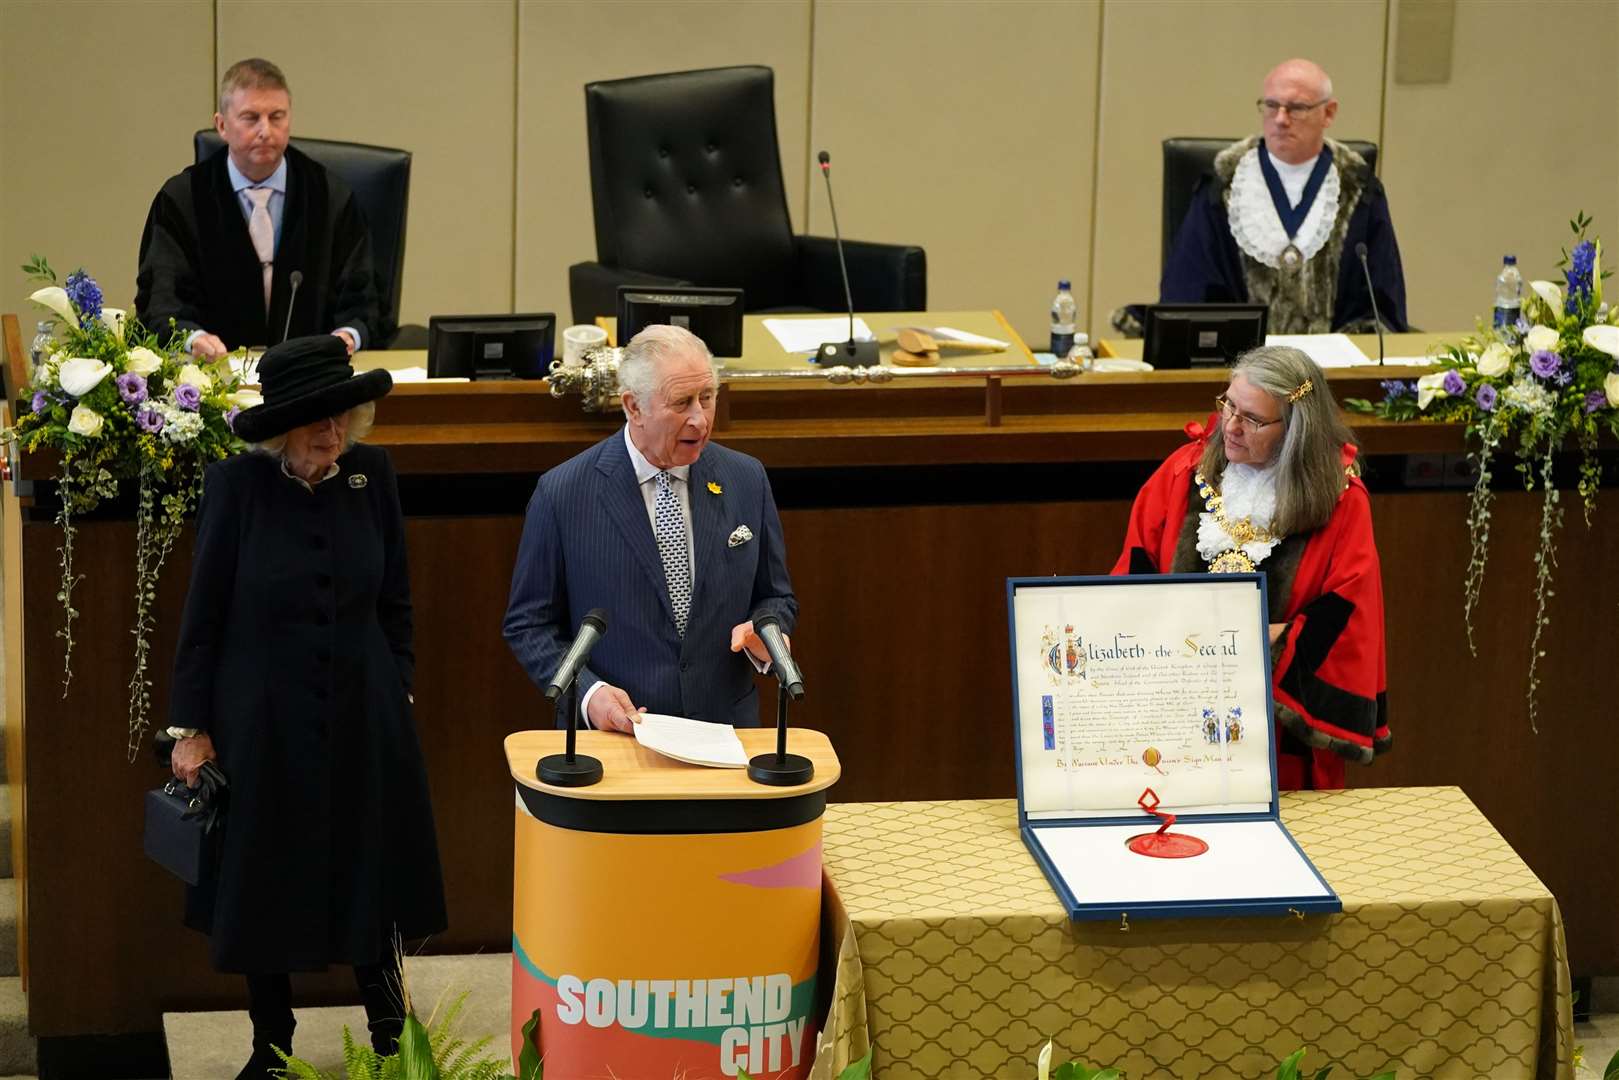 Charles addresses the council chamber at the Civic Centre in Southend-on-Sea (Gareth Fuller/PA)